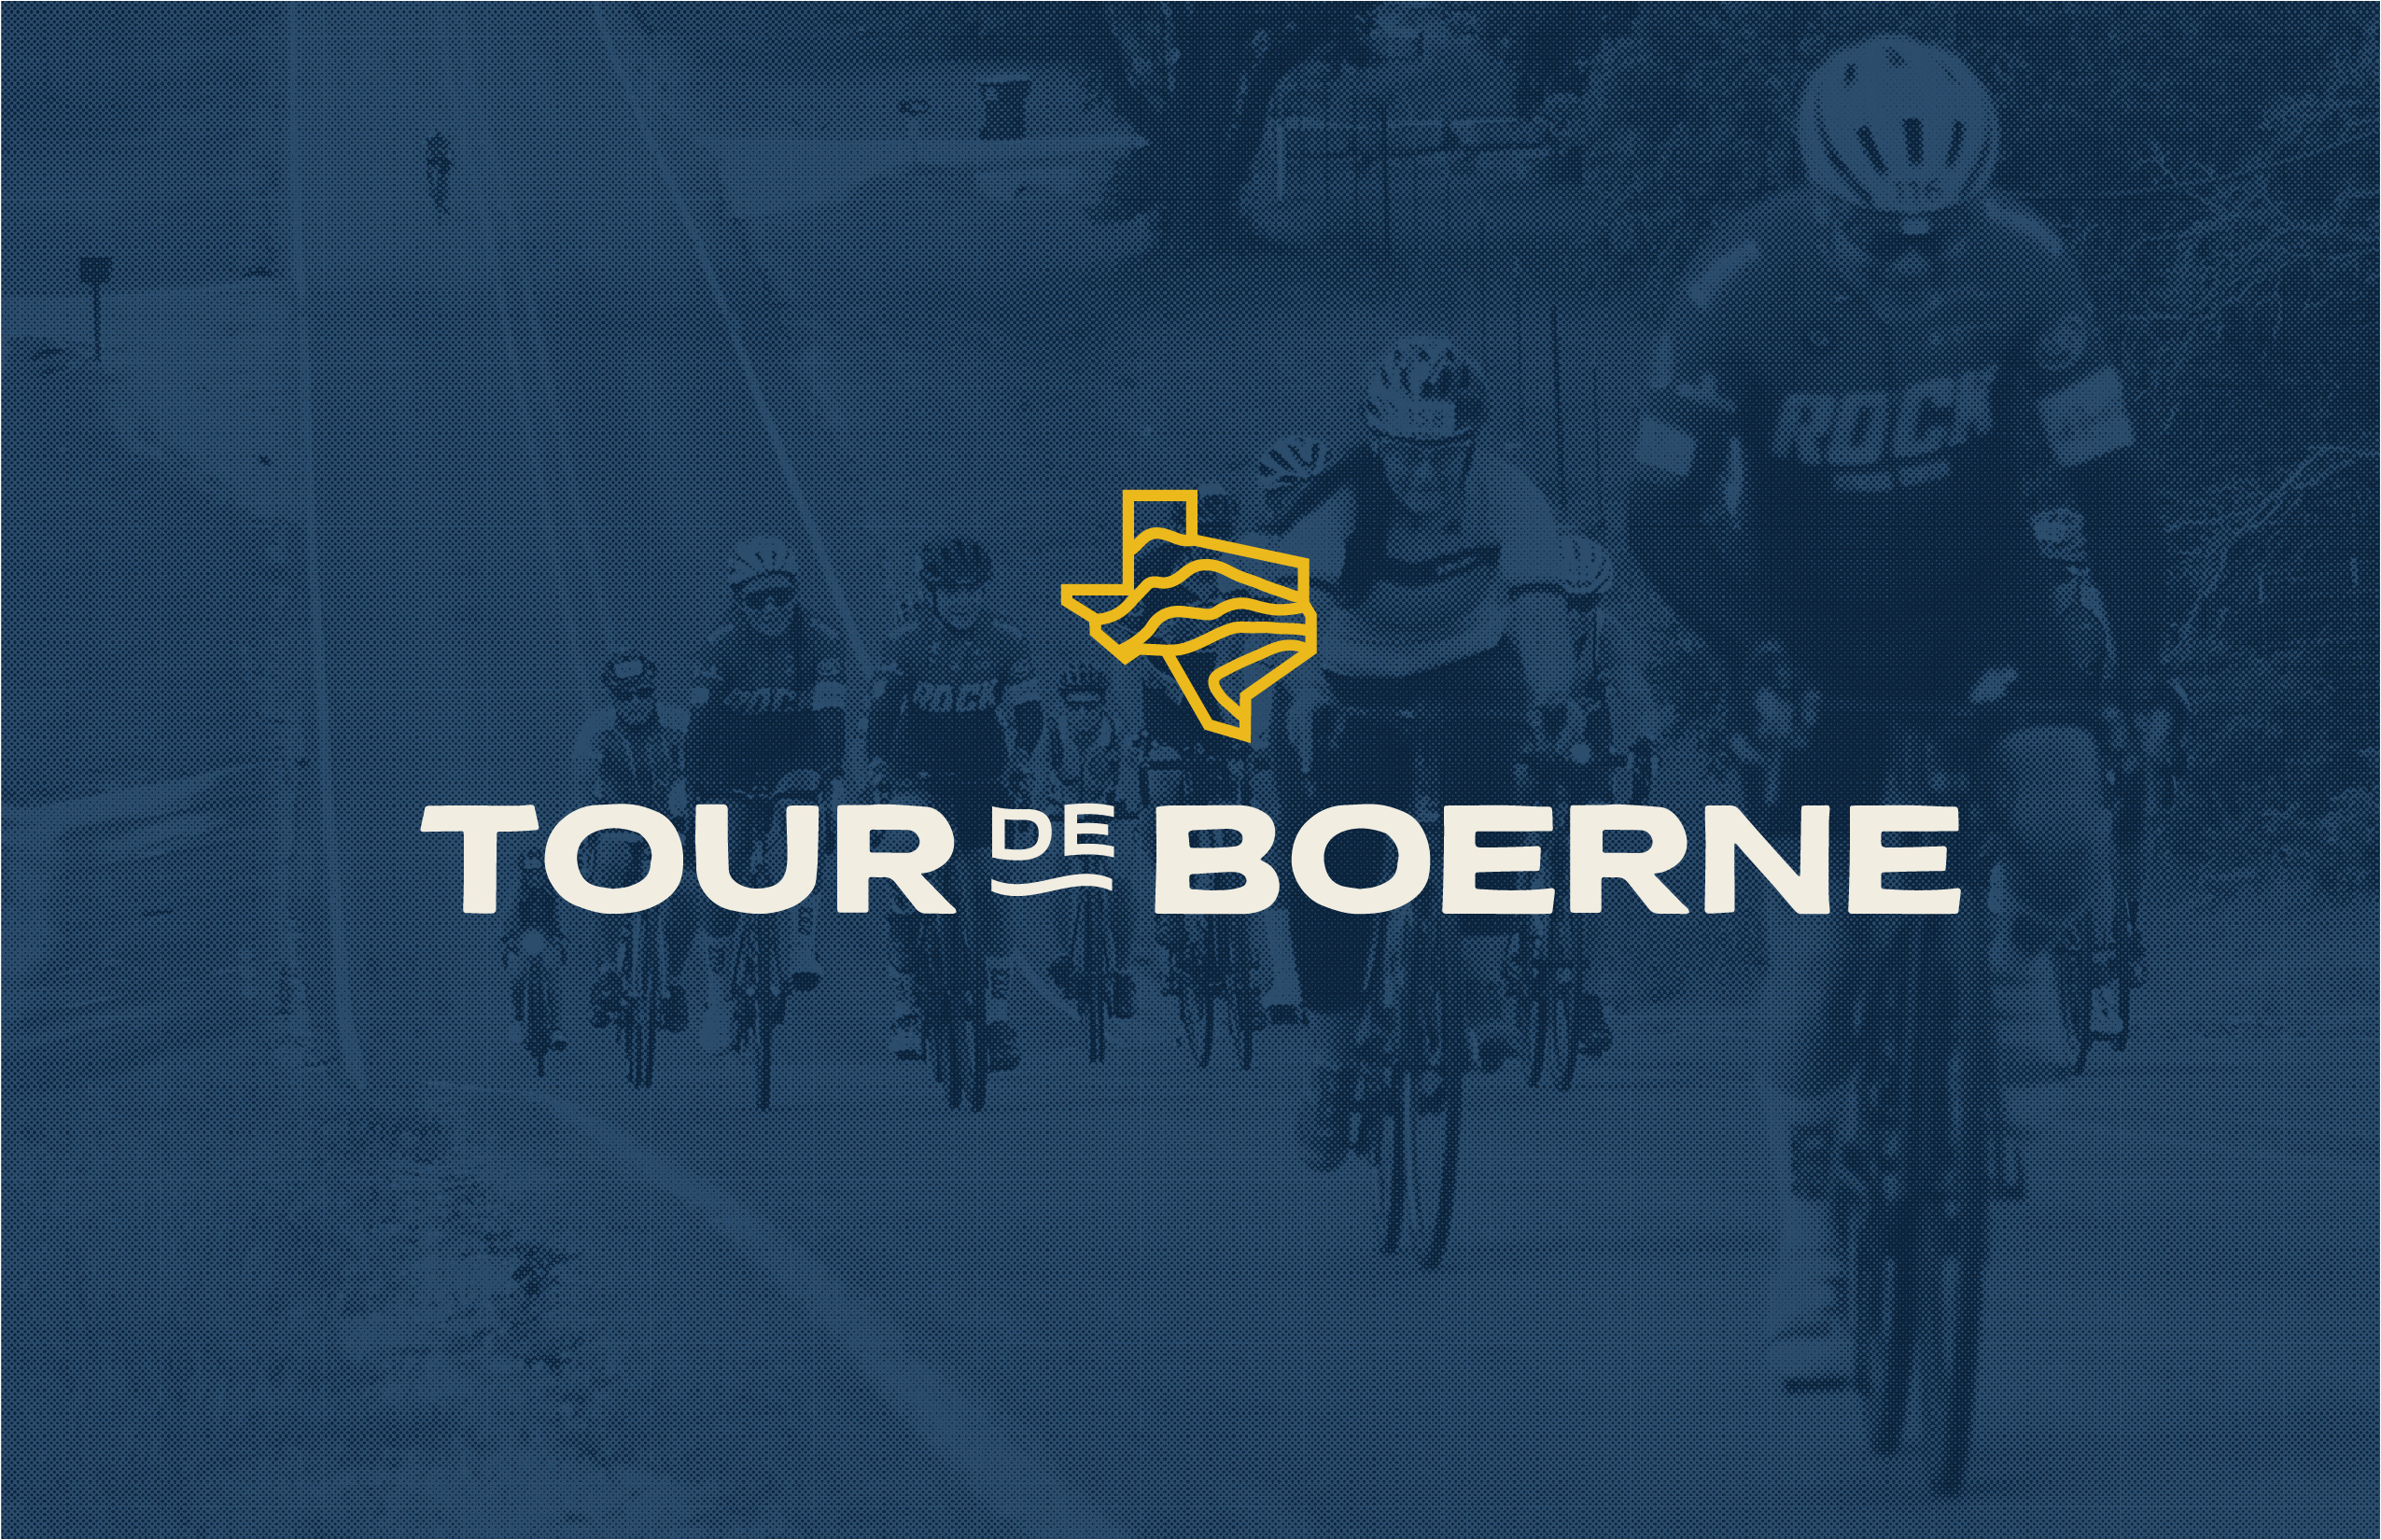 Showing the web logo for Tour de Boerne. Branding designed by MDR for this San Antonio-based organization.